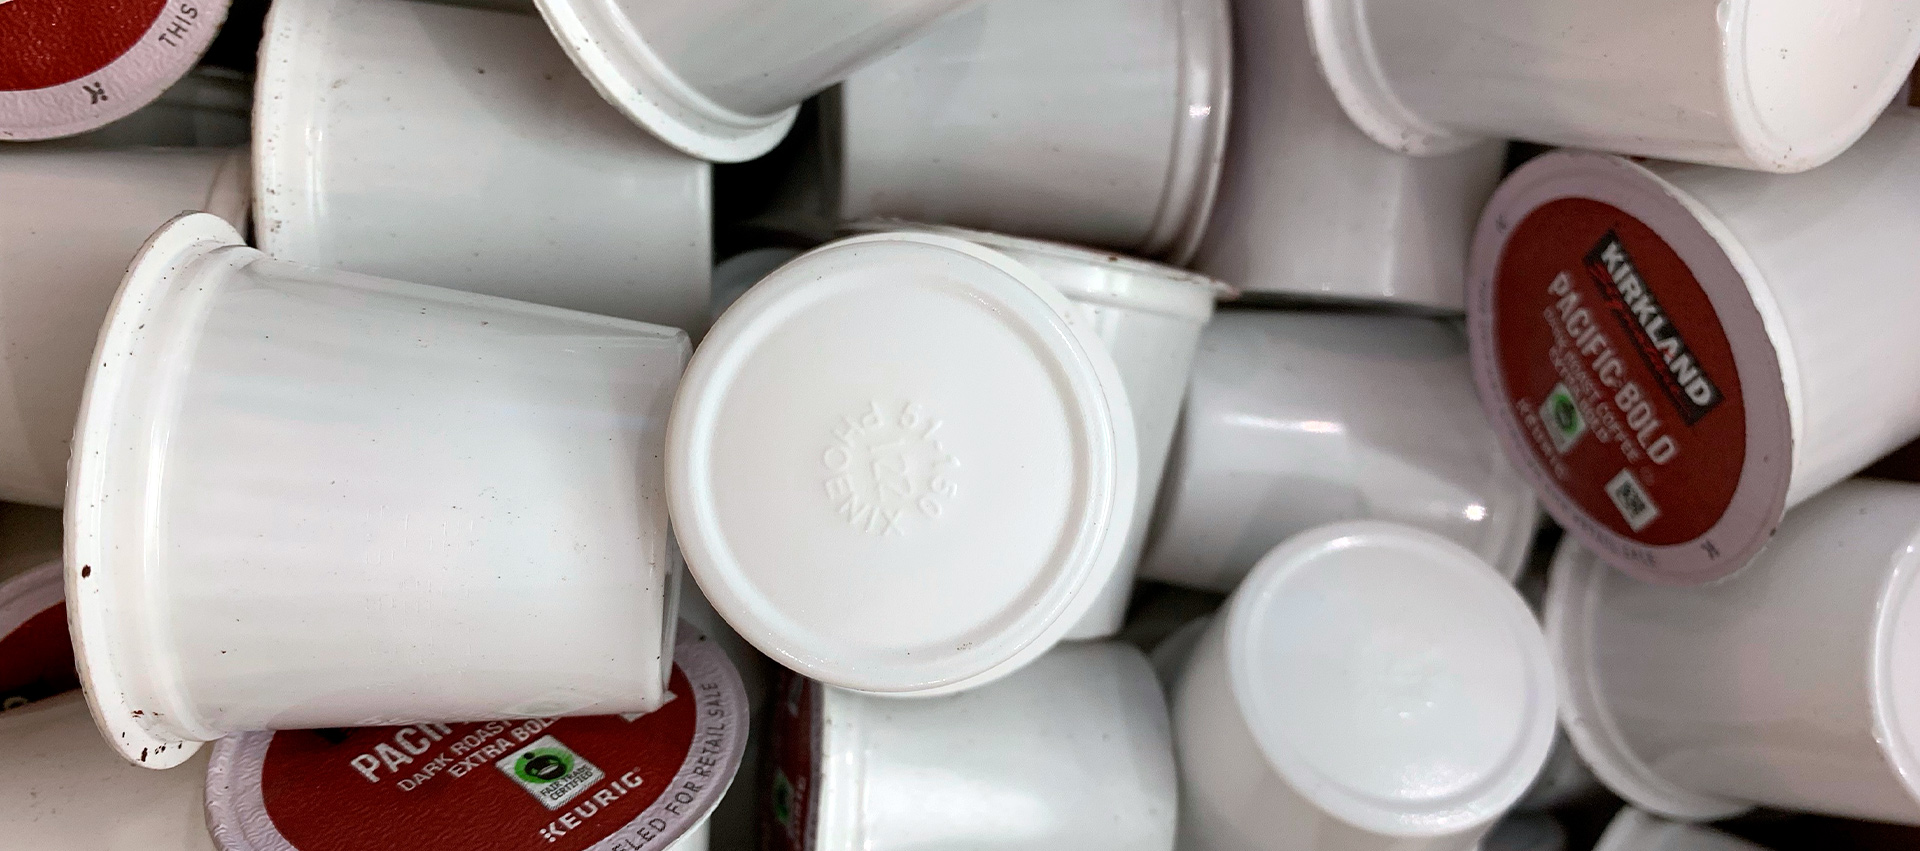 The Future is in Sustainability: The Recyclable K-Cup